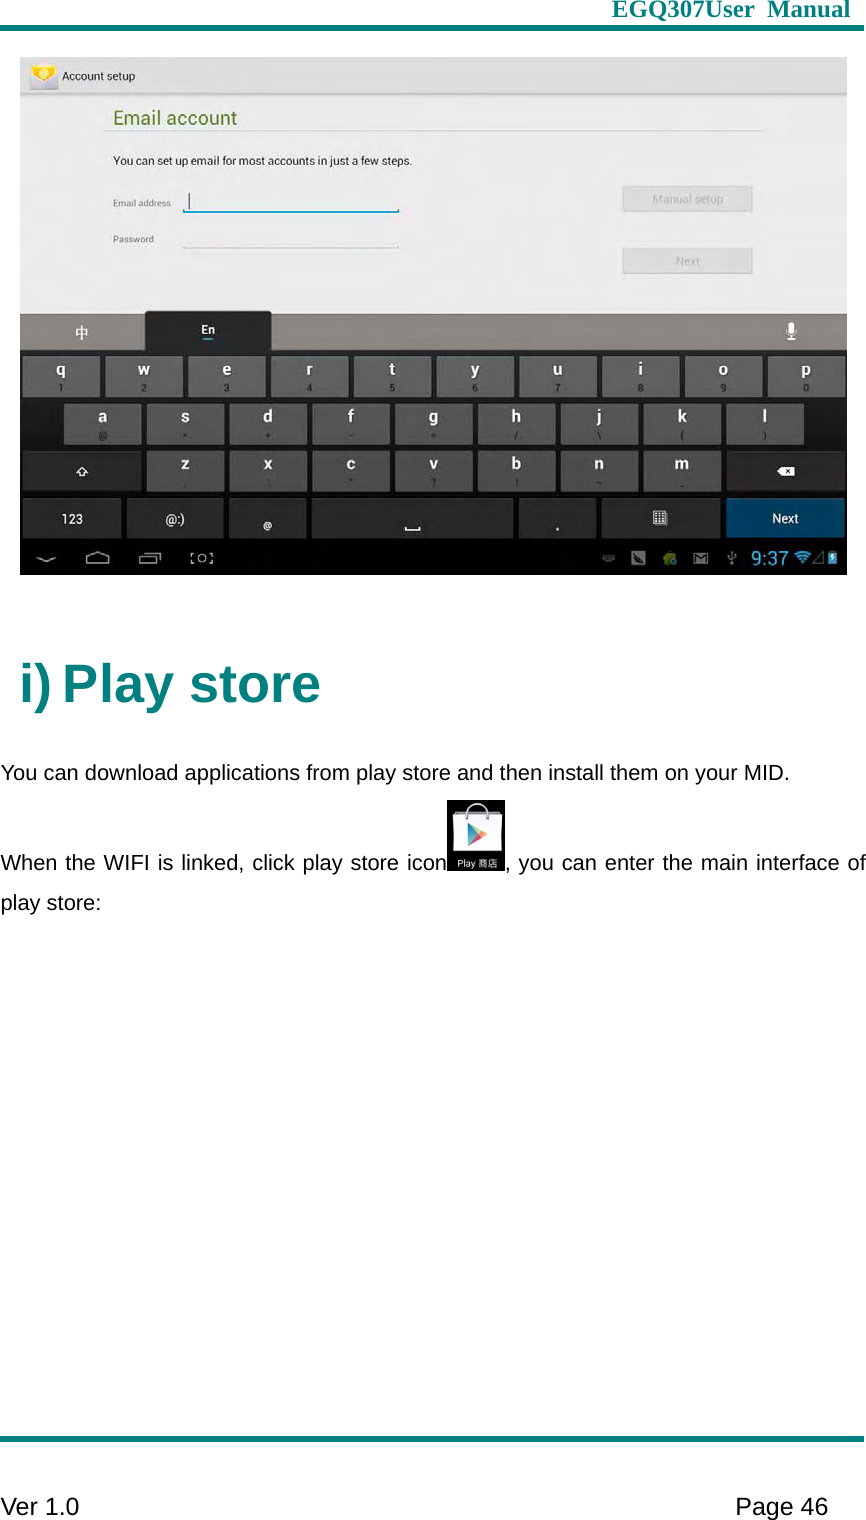                     EGQ307User Manual     Ver 1.0    Page 46    i) Play store You can download applications from play store and then install them on your MID.   When the WIFI is linked, click play store icon , you can enter the main interface of play store:   